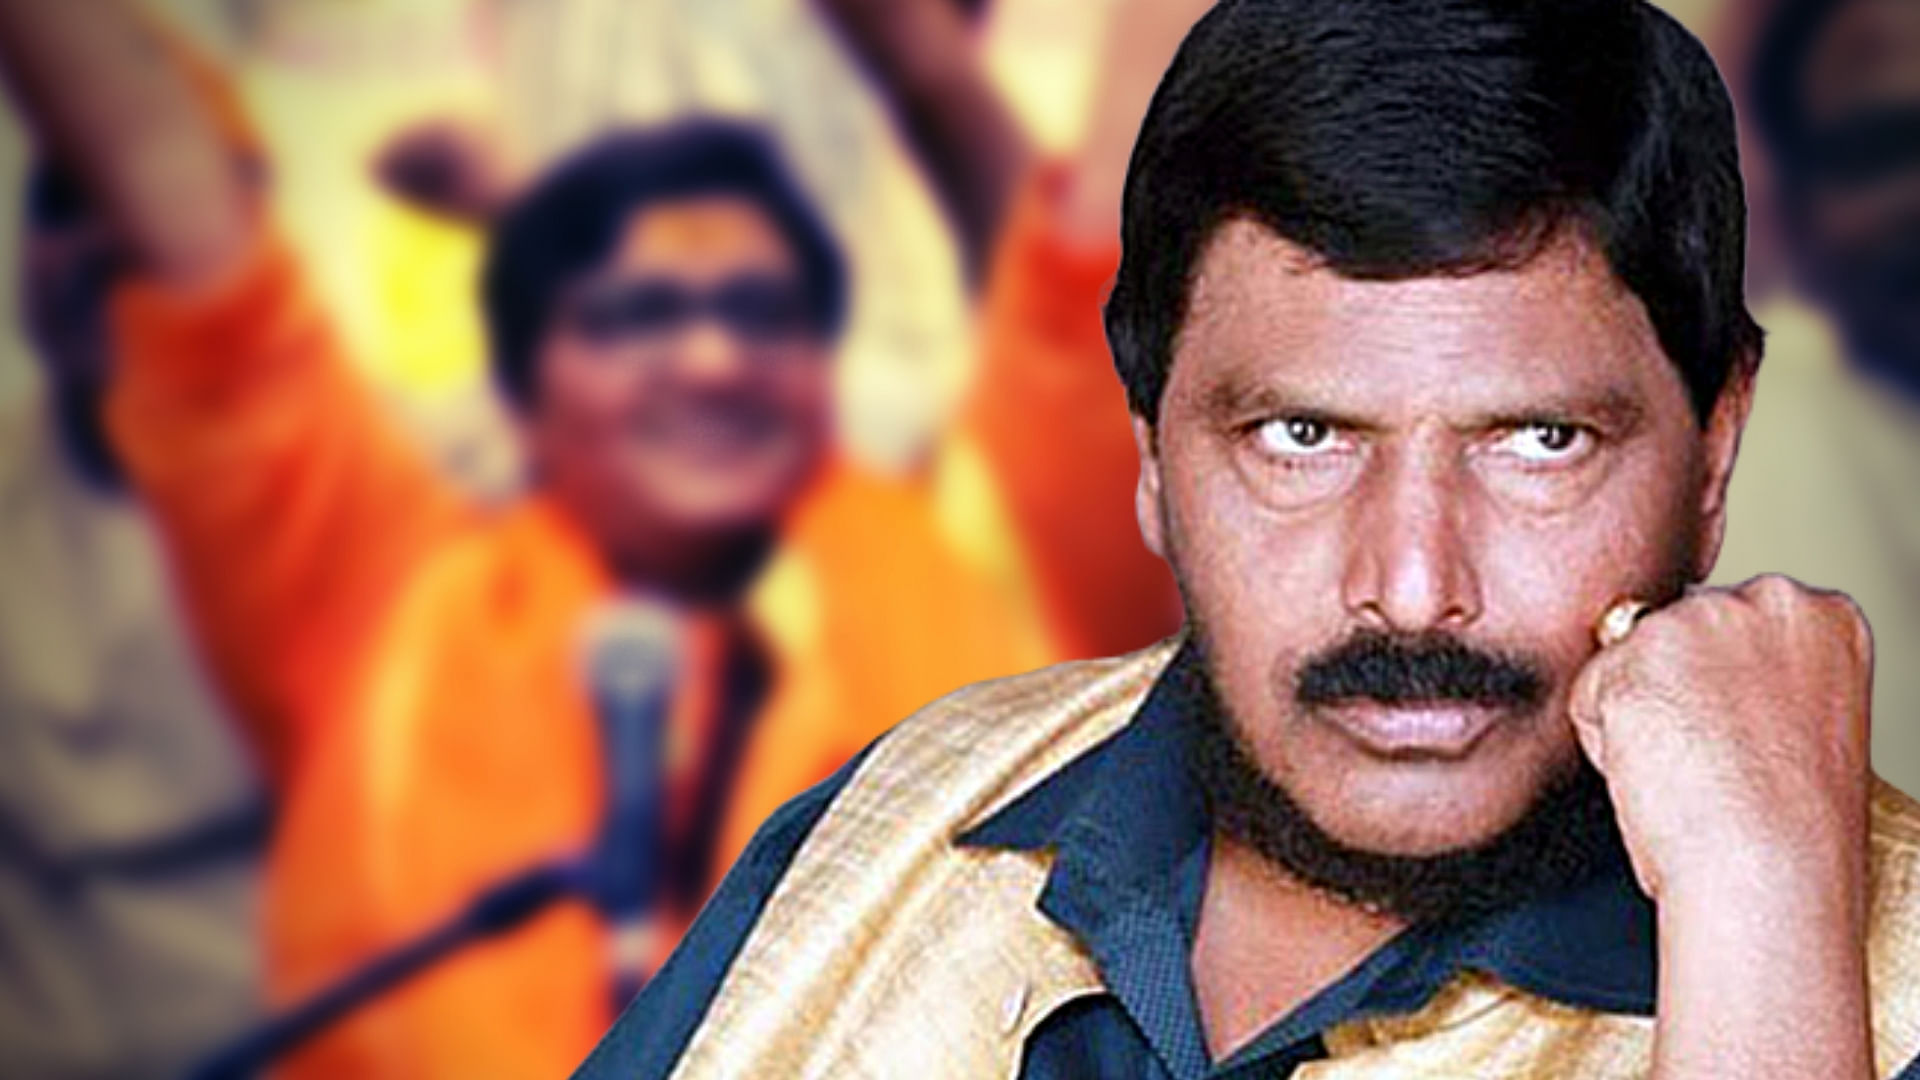 Union Minister Ramdas Athawale slammed the BJP over its decision to field terror-accused Pragya Thakur from Bhopal.